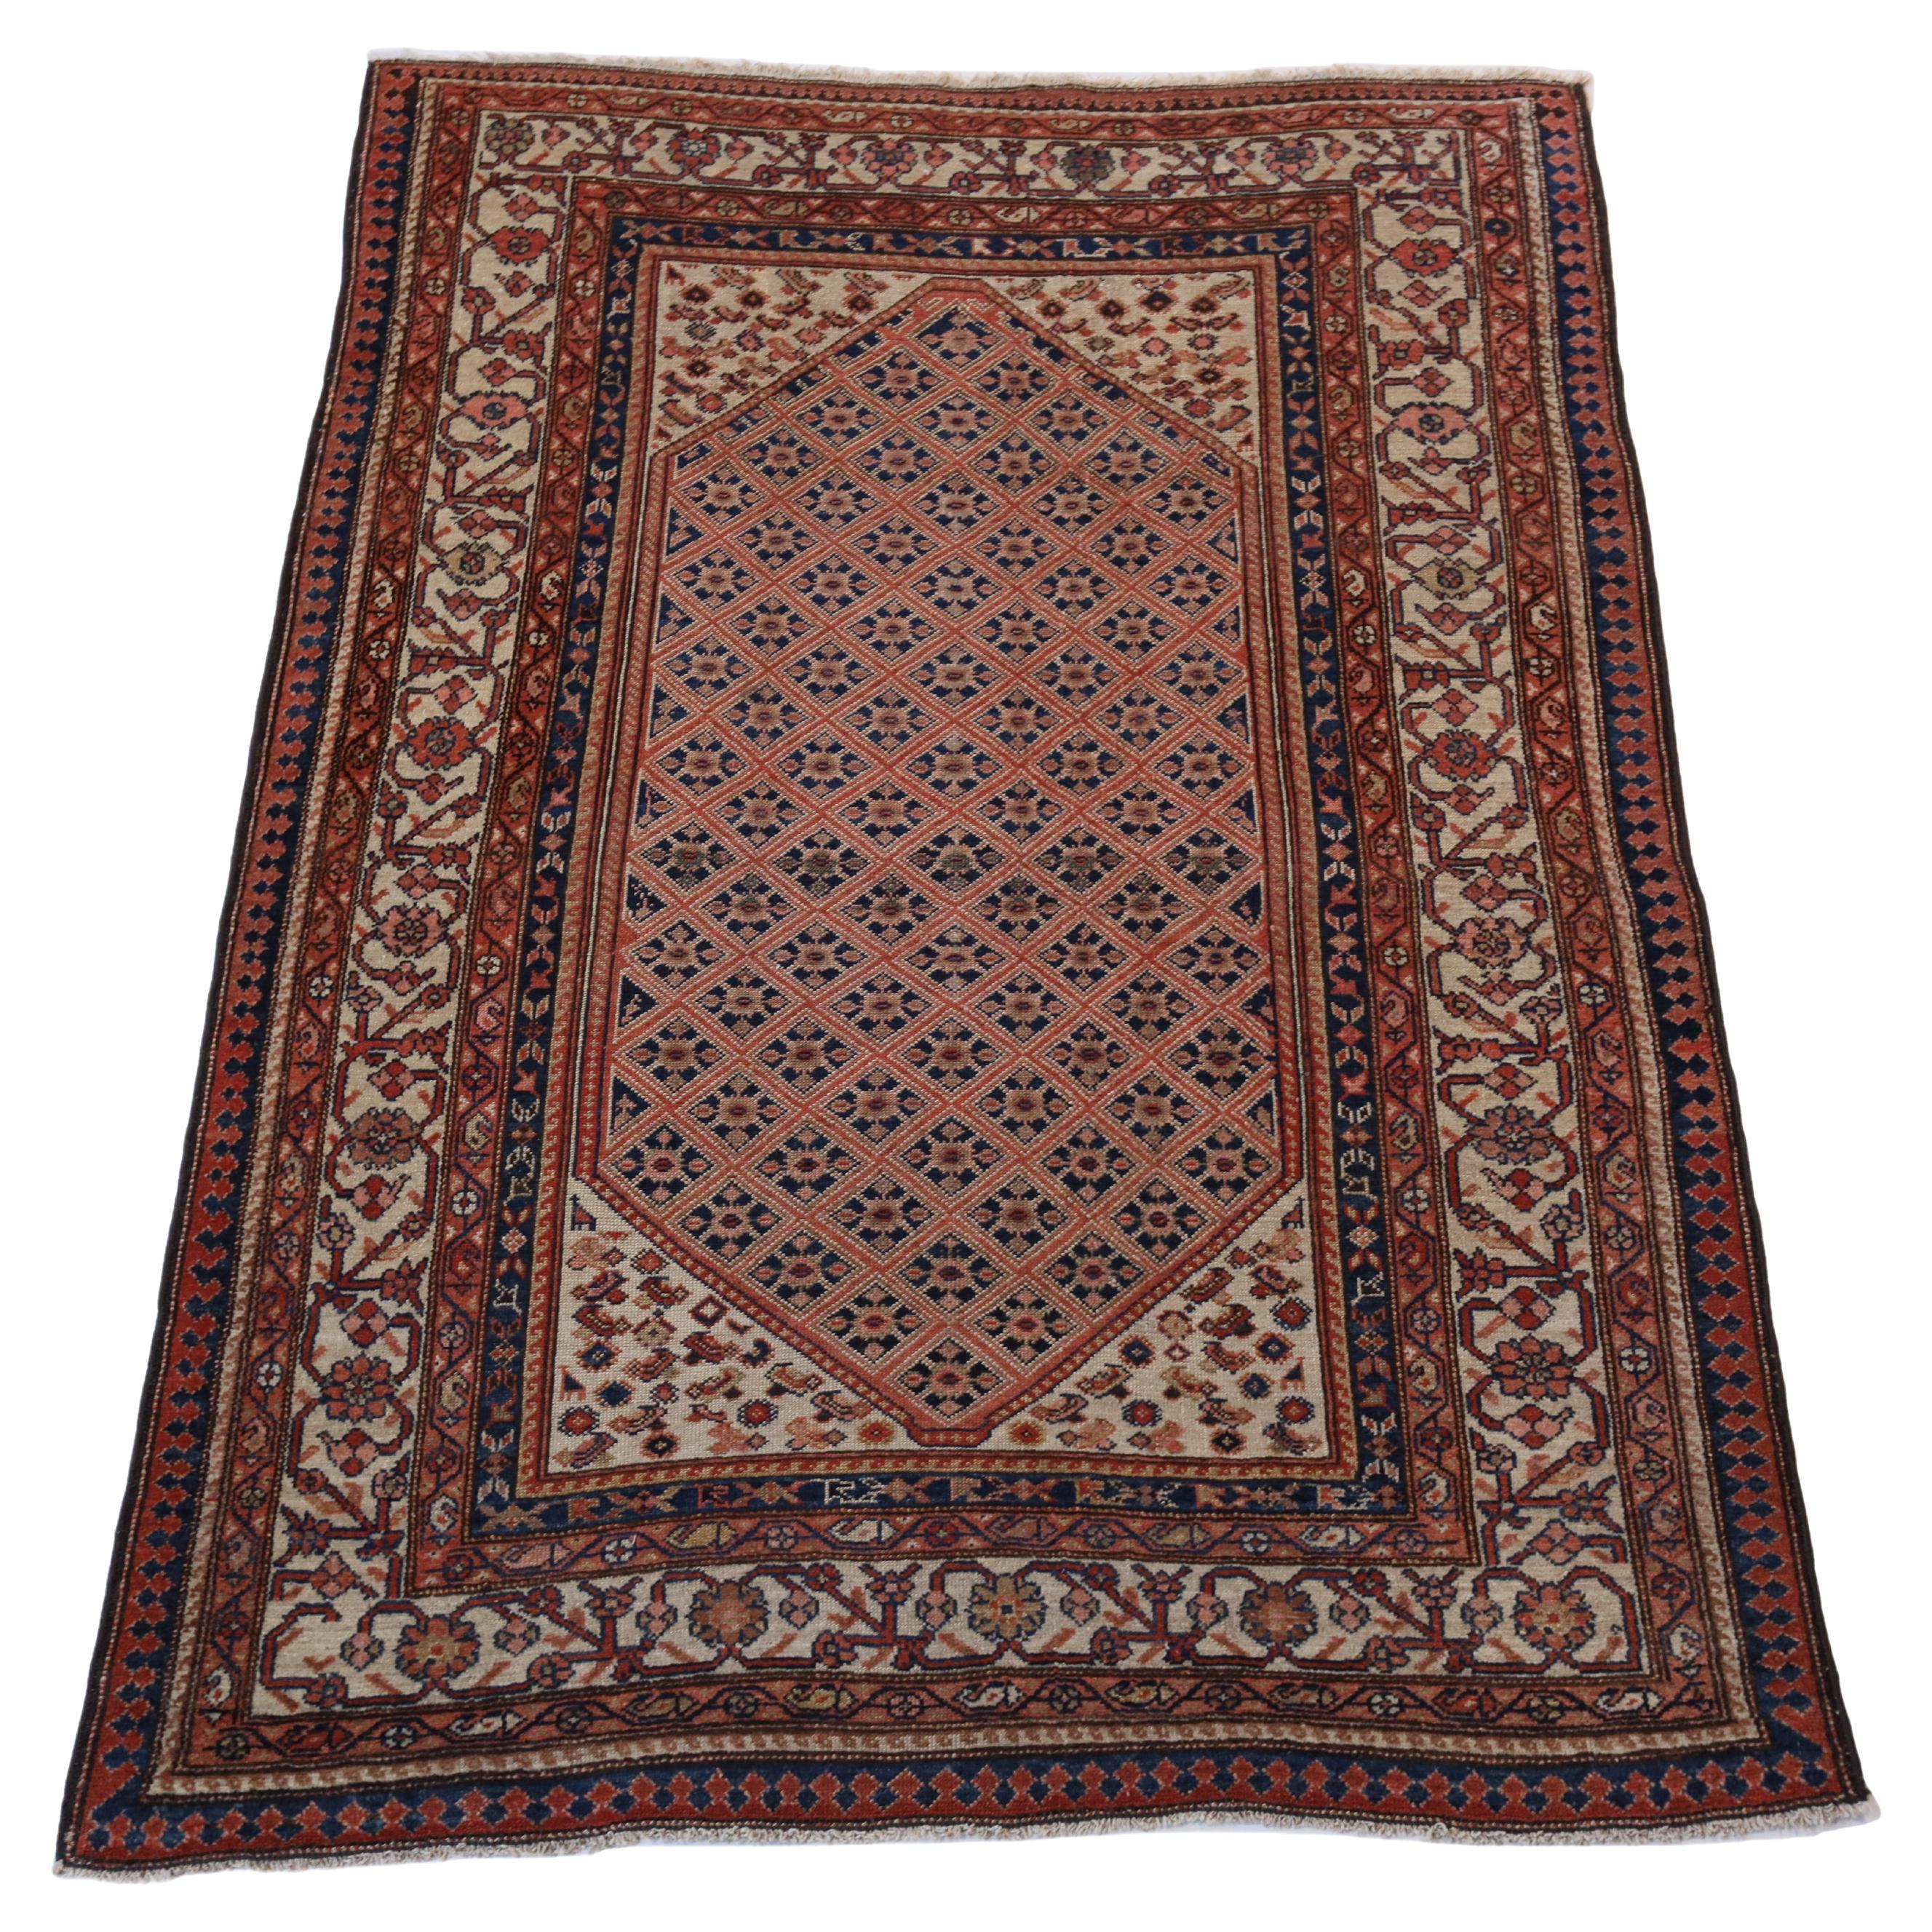 Malayer Antique Rug, Red Ivory Blue - 4 x 6 For Sale